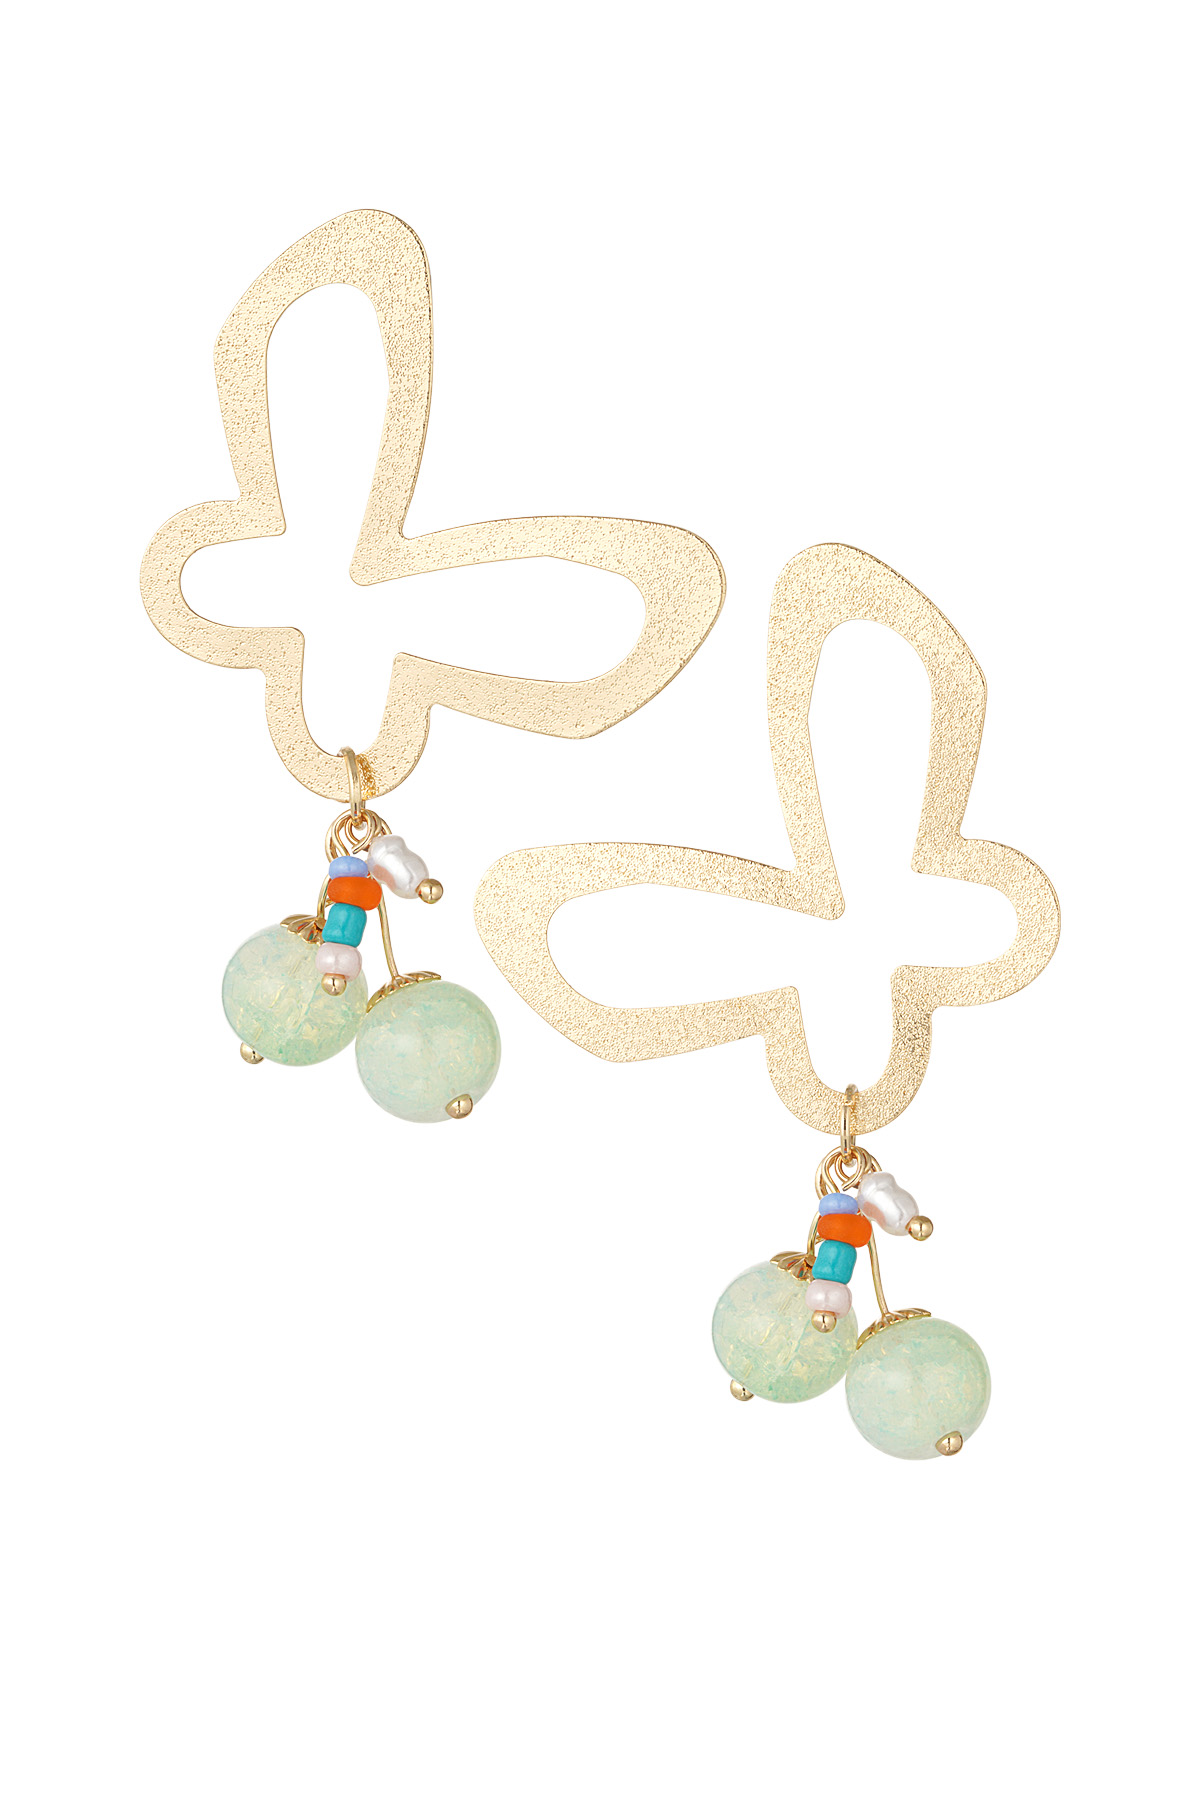 Butterfly party earrings with charms - green/gold 